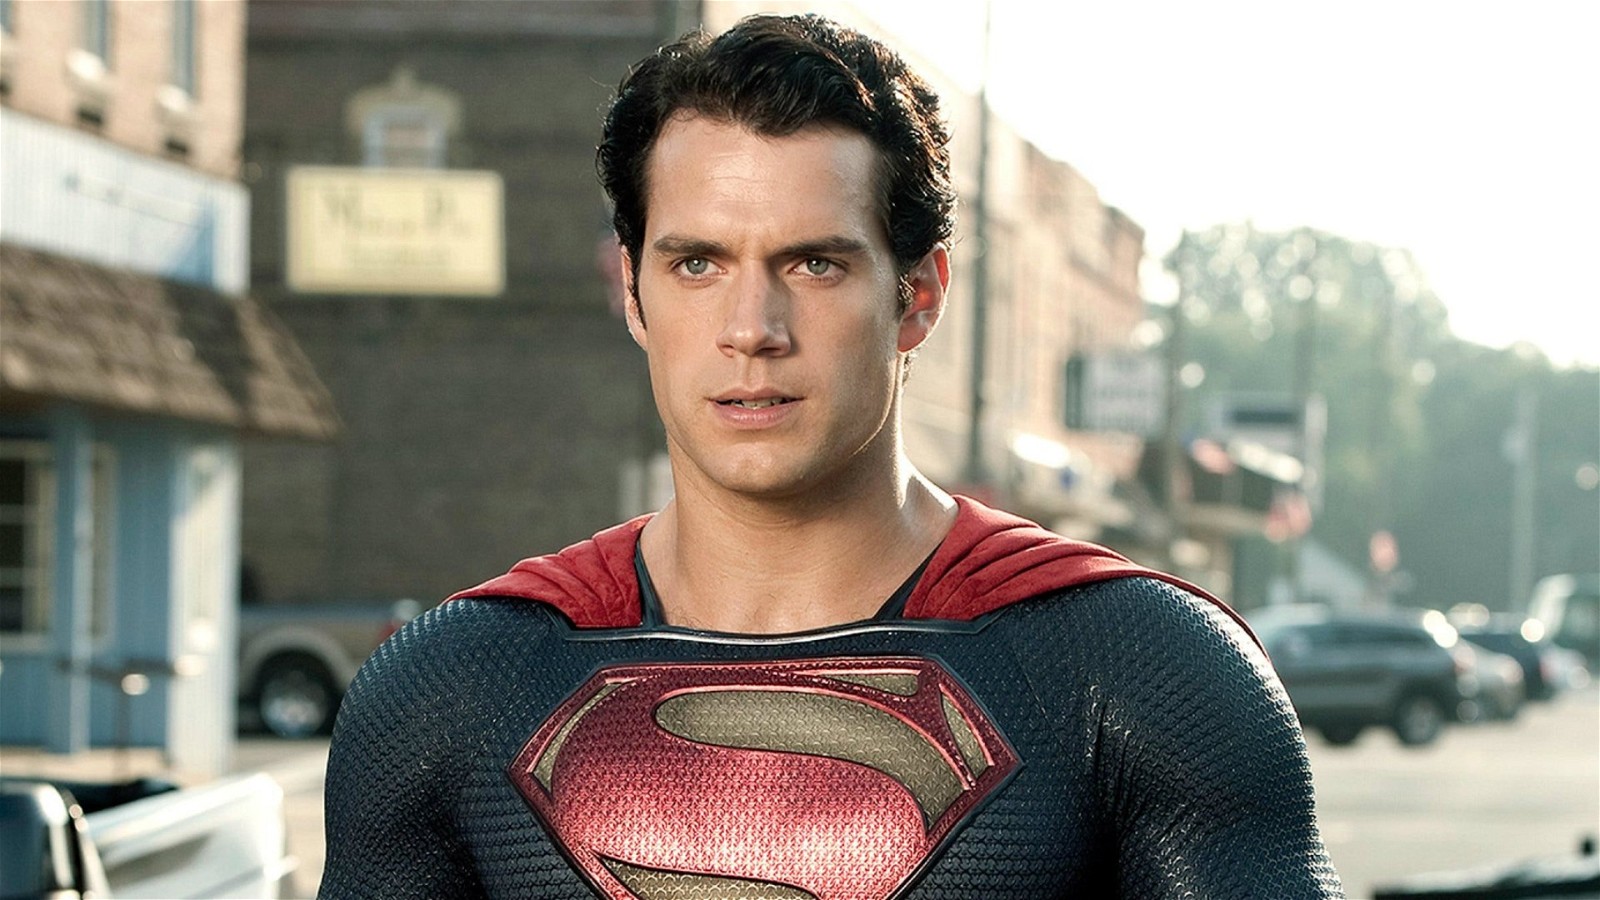 A determined Henry Cavill as Superman in Man of Steel by Zack Snyder